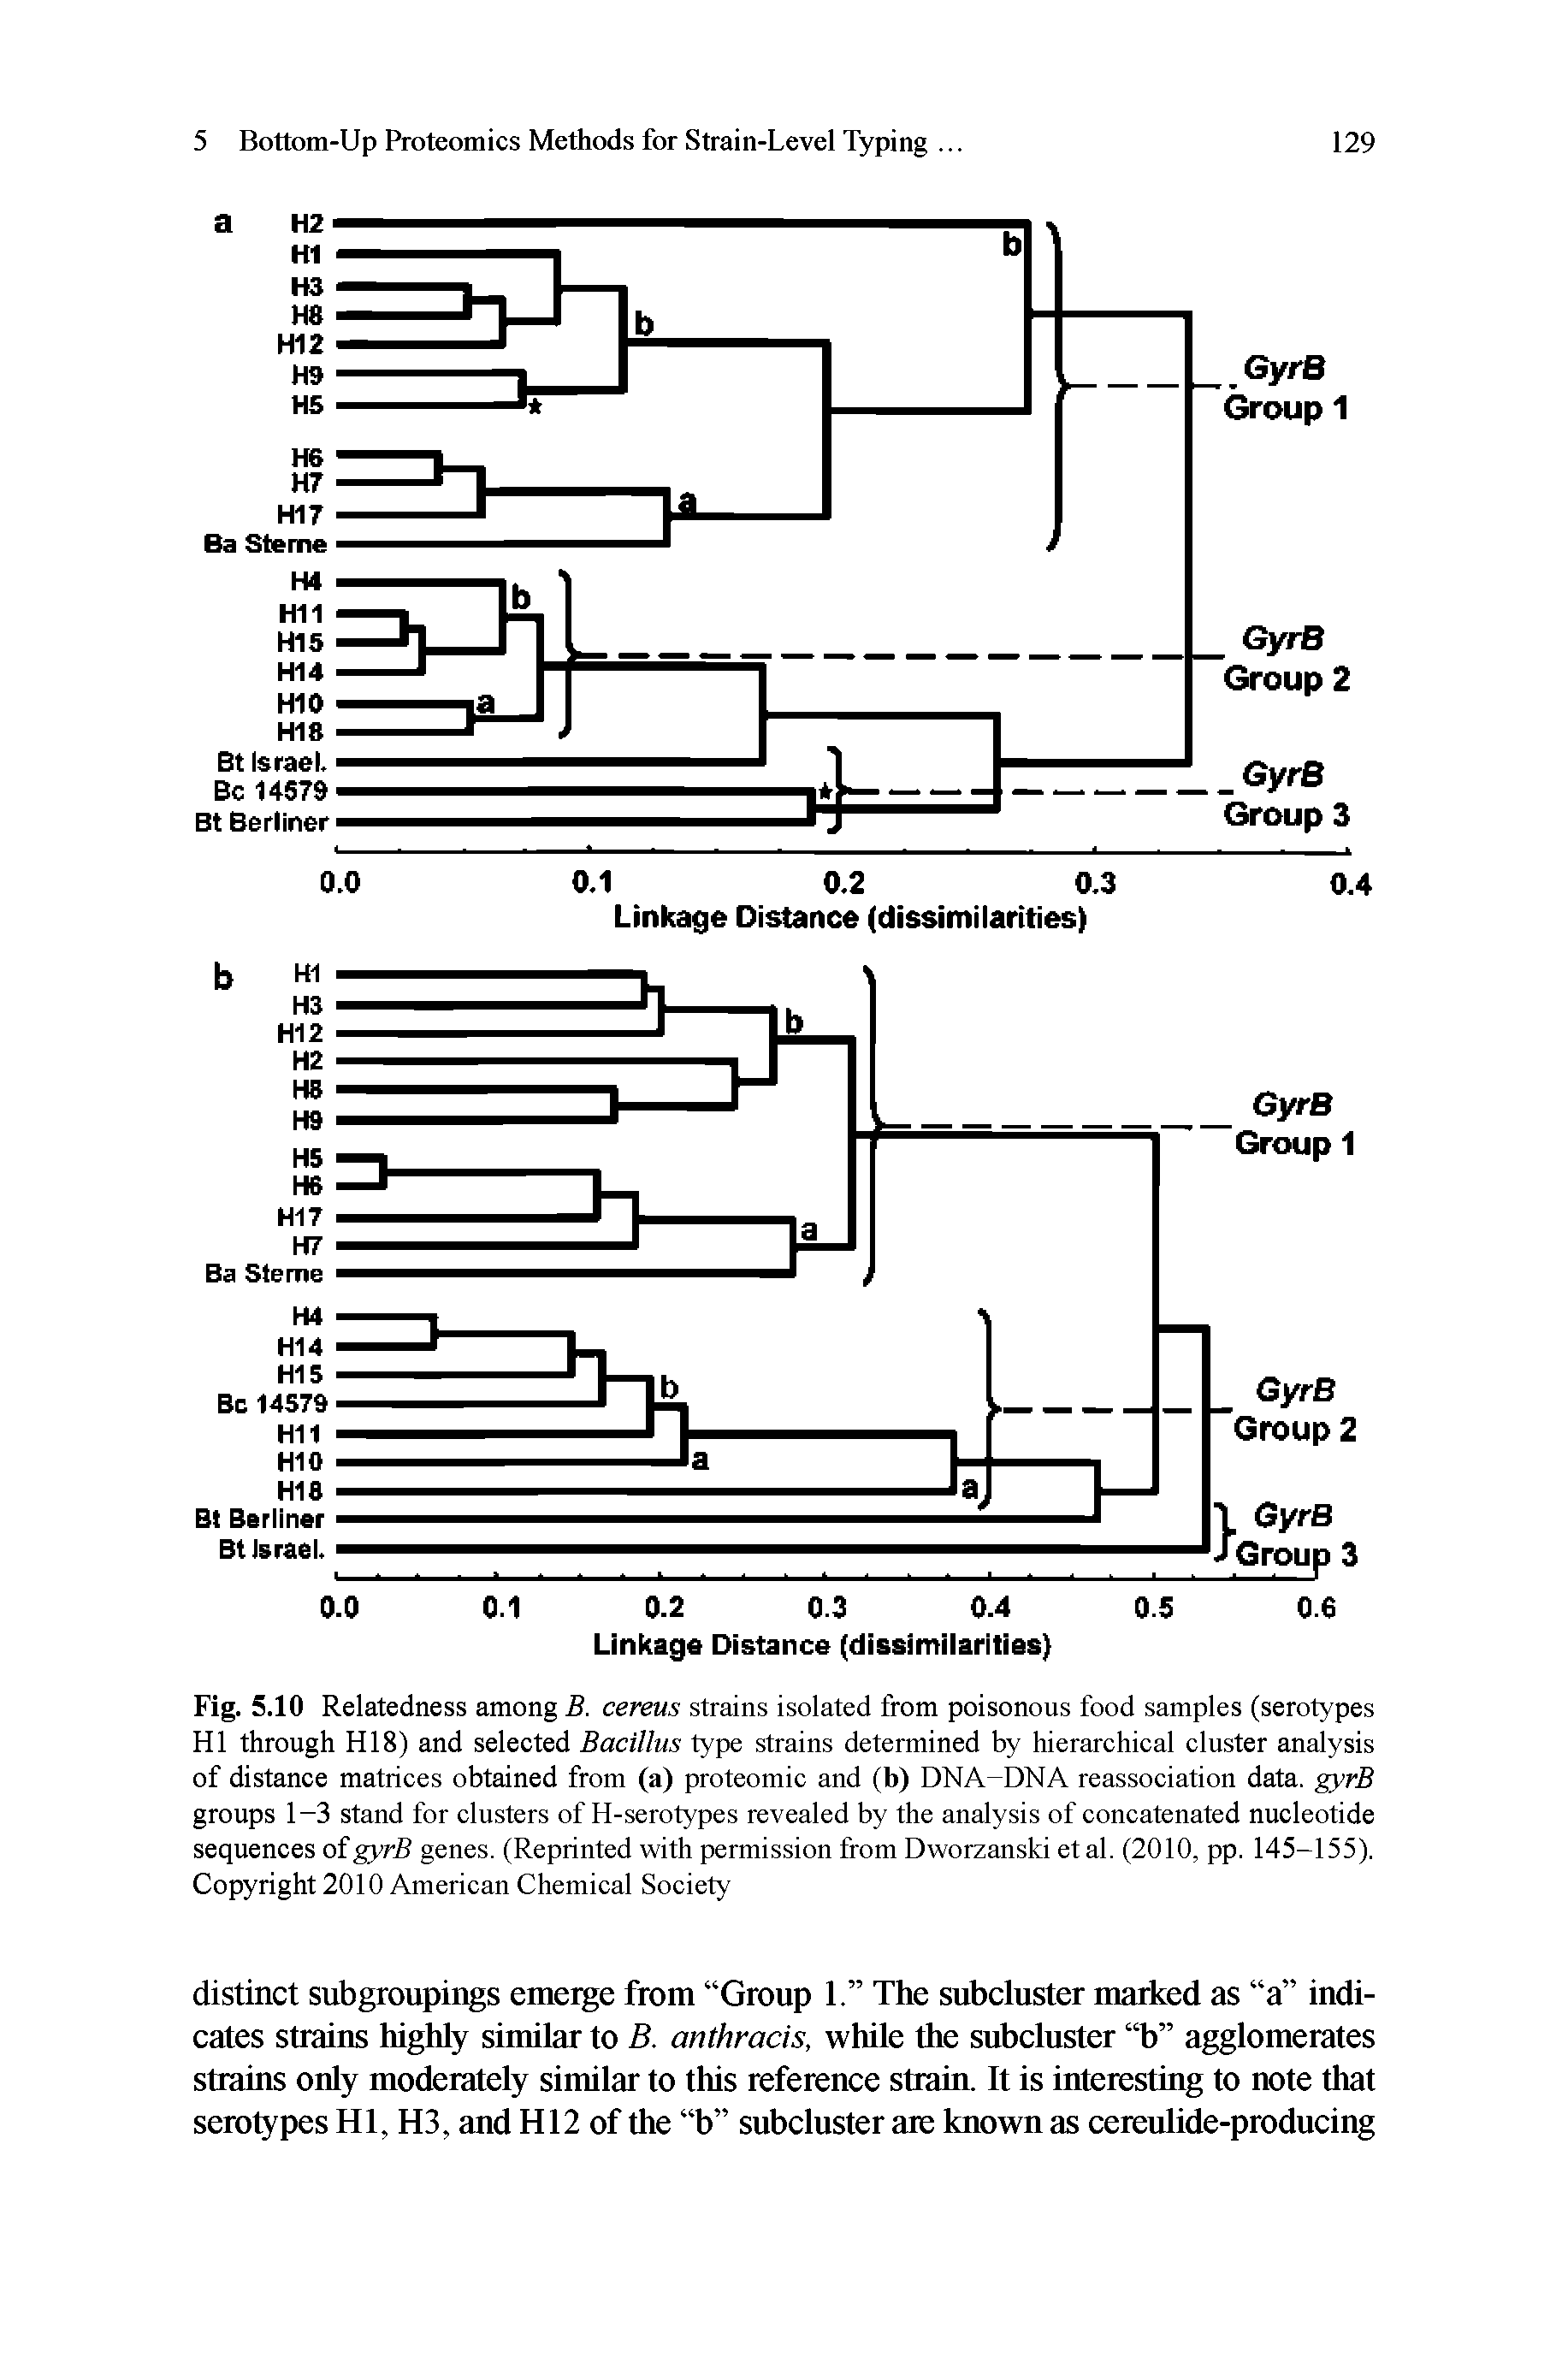 Fig. 5.10 Relatedness among B. cereus strains isolated from poisonous food samples (serotypes HI through HI8) and seleeted Bacillus type strains determined by hierarchieal cluster analysis of distance matrices obtained from (a) proteomic and (b) DNA-DNA reassociation data. gyrB groups 1-3 stand for clusters of H-serotypes revealed by the analysis of concatenated nucleotide sequences oigyrB genes. (Reprinted with permission from Dworzanski etal. (2010, pp. 145-155). Copyright 2010 American Chemical Society...